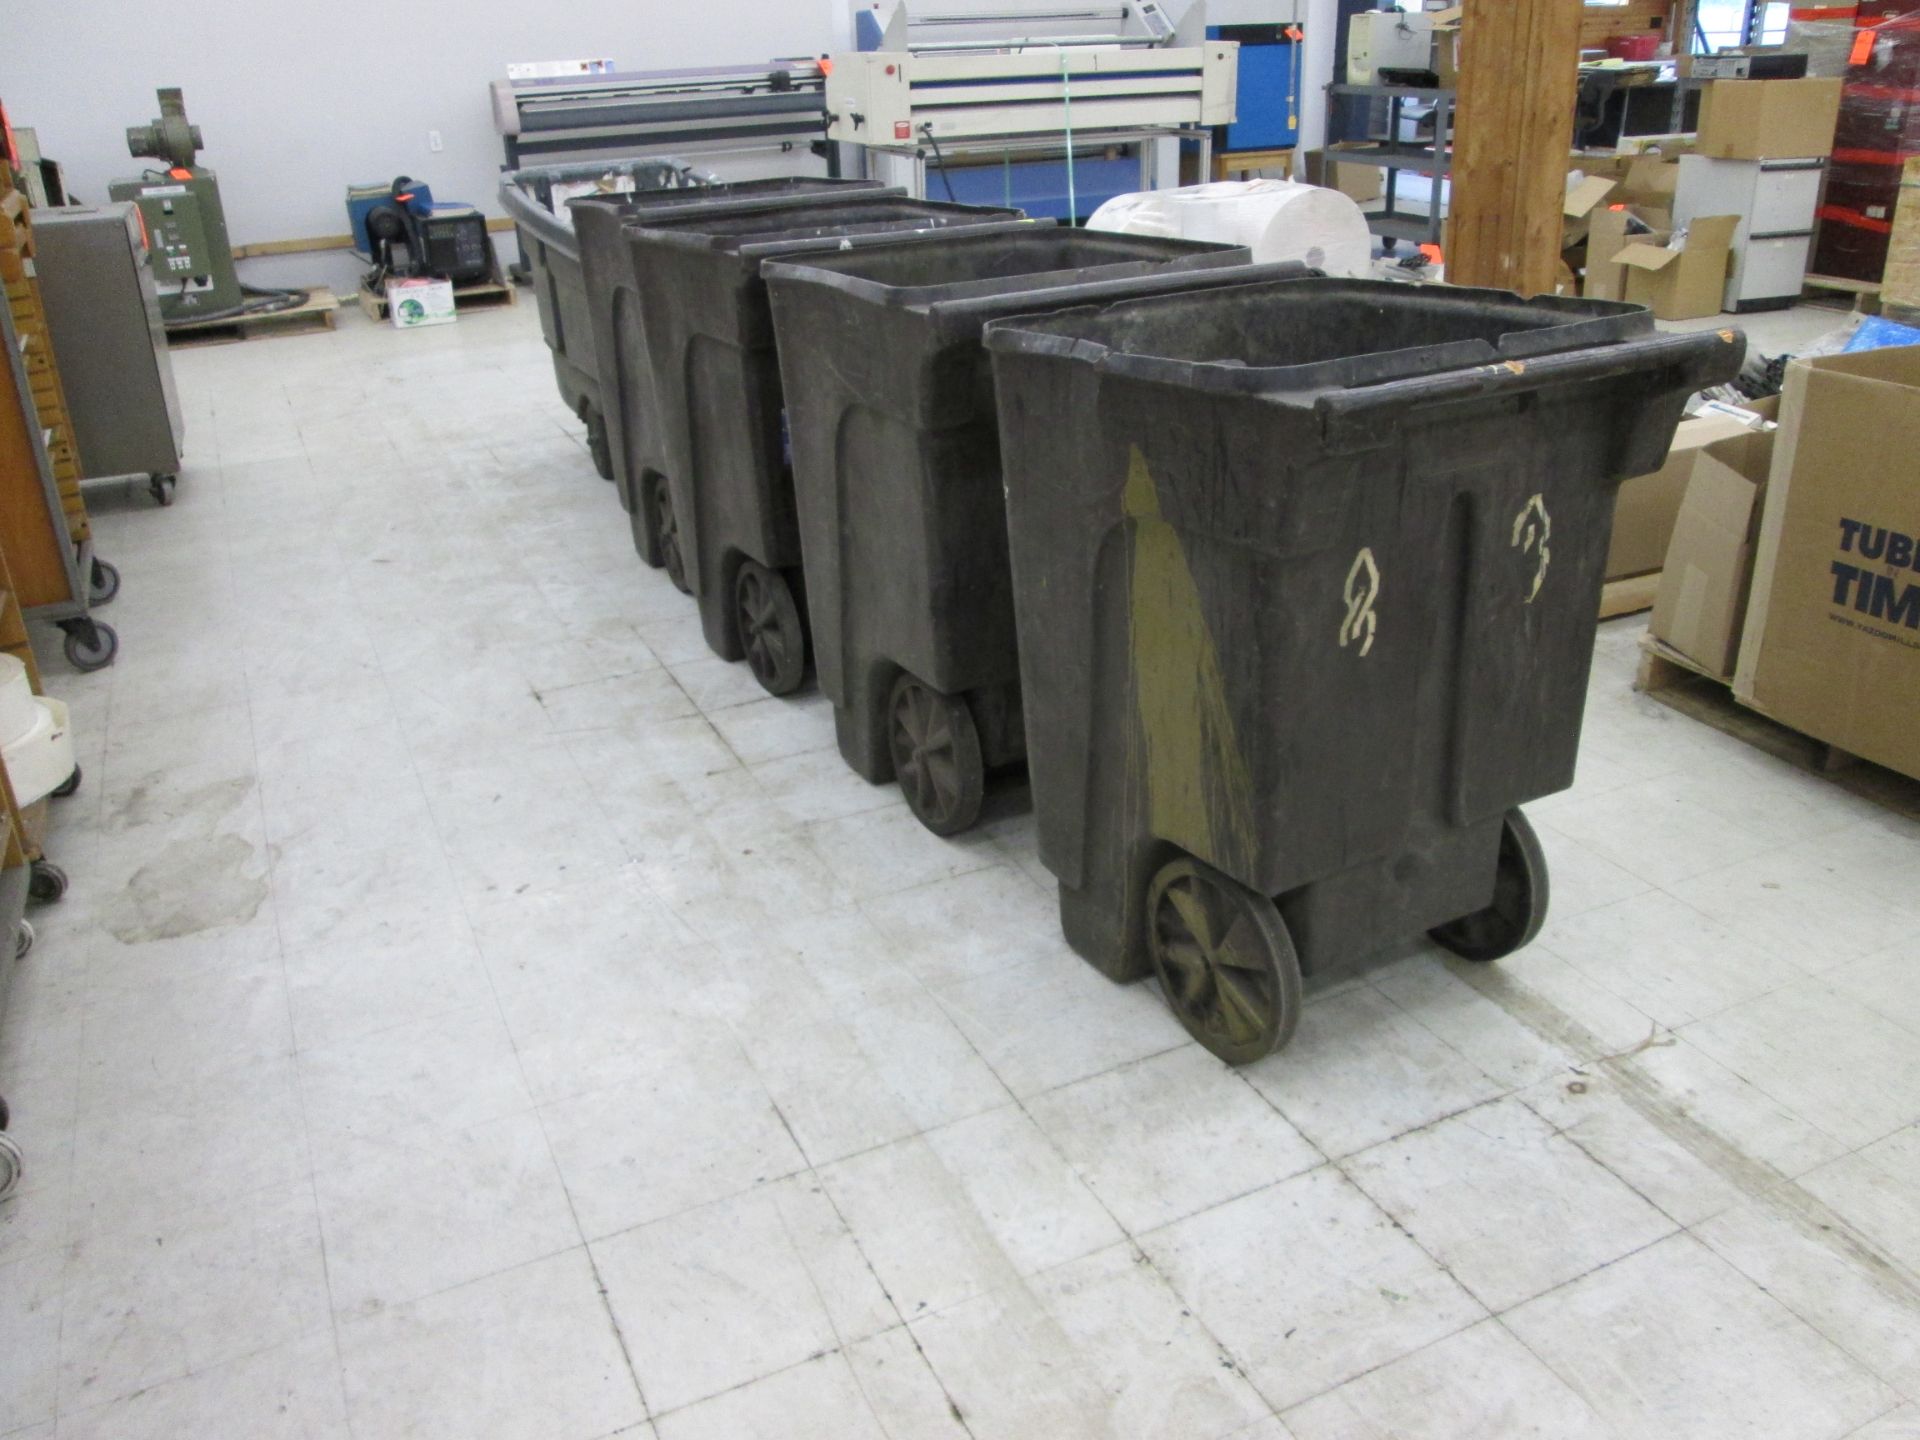 Lot of (3) assorted self-dumping hoppers, and (7) refuse containers, etc. - LOCATED AT 524 ROUTE 7 - Image 2 of 3